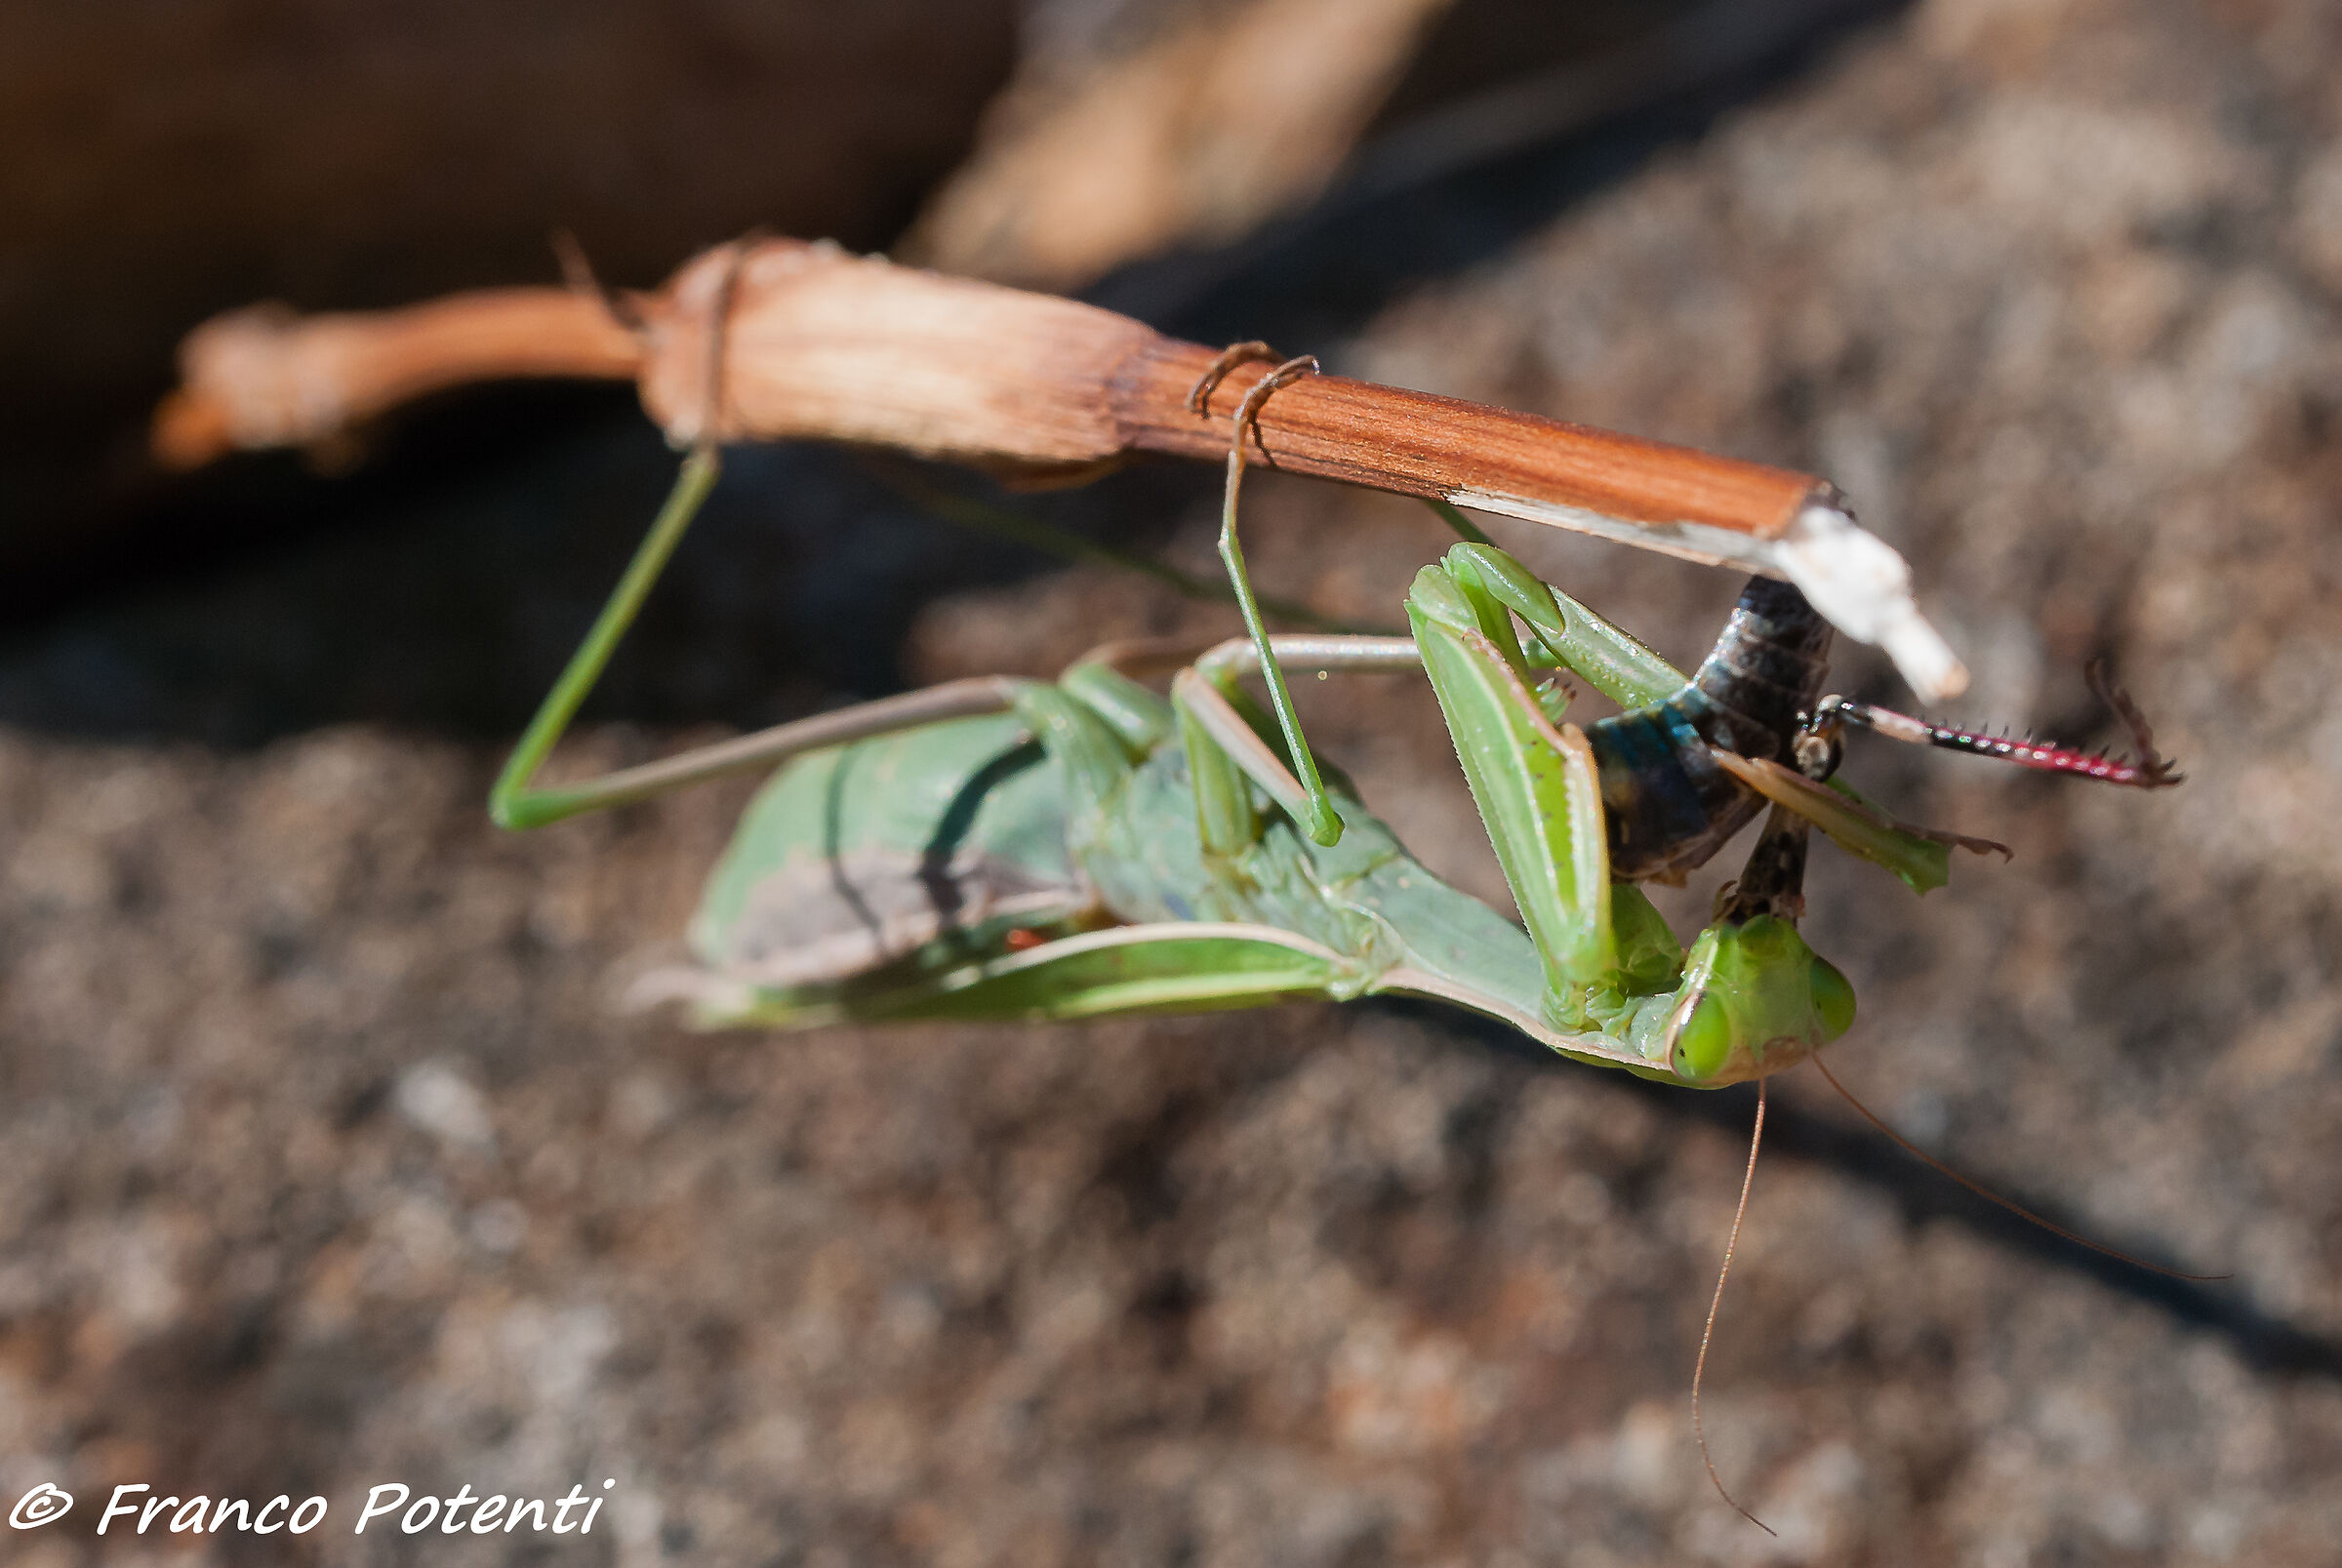 The meal of the praying mantis...